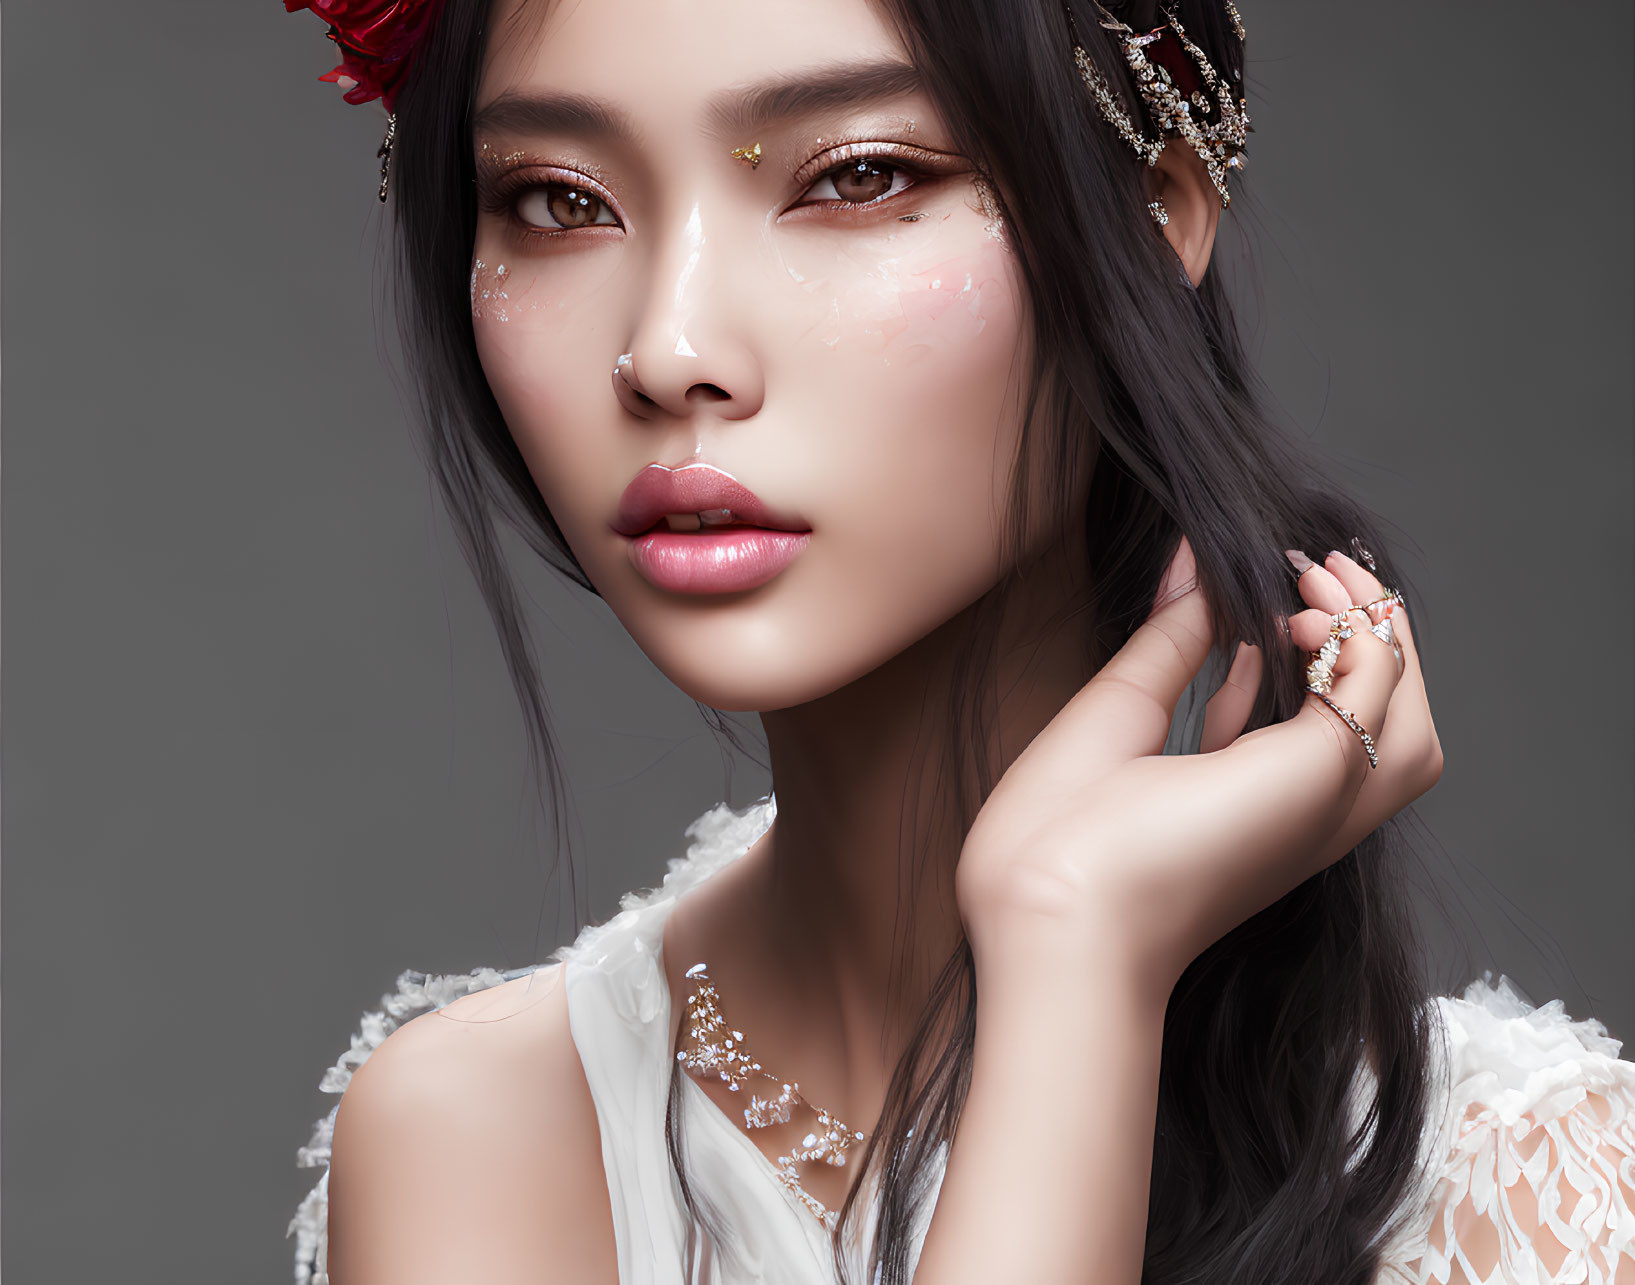 Woman with Artistic Makeup, Flowers, and Jewelry on Grey Background